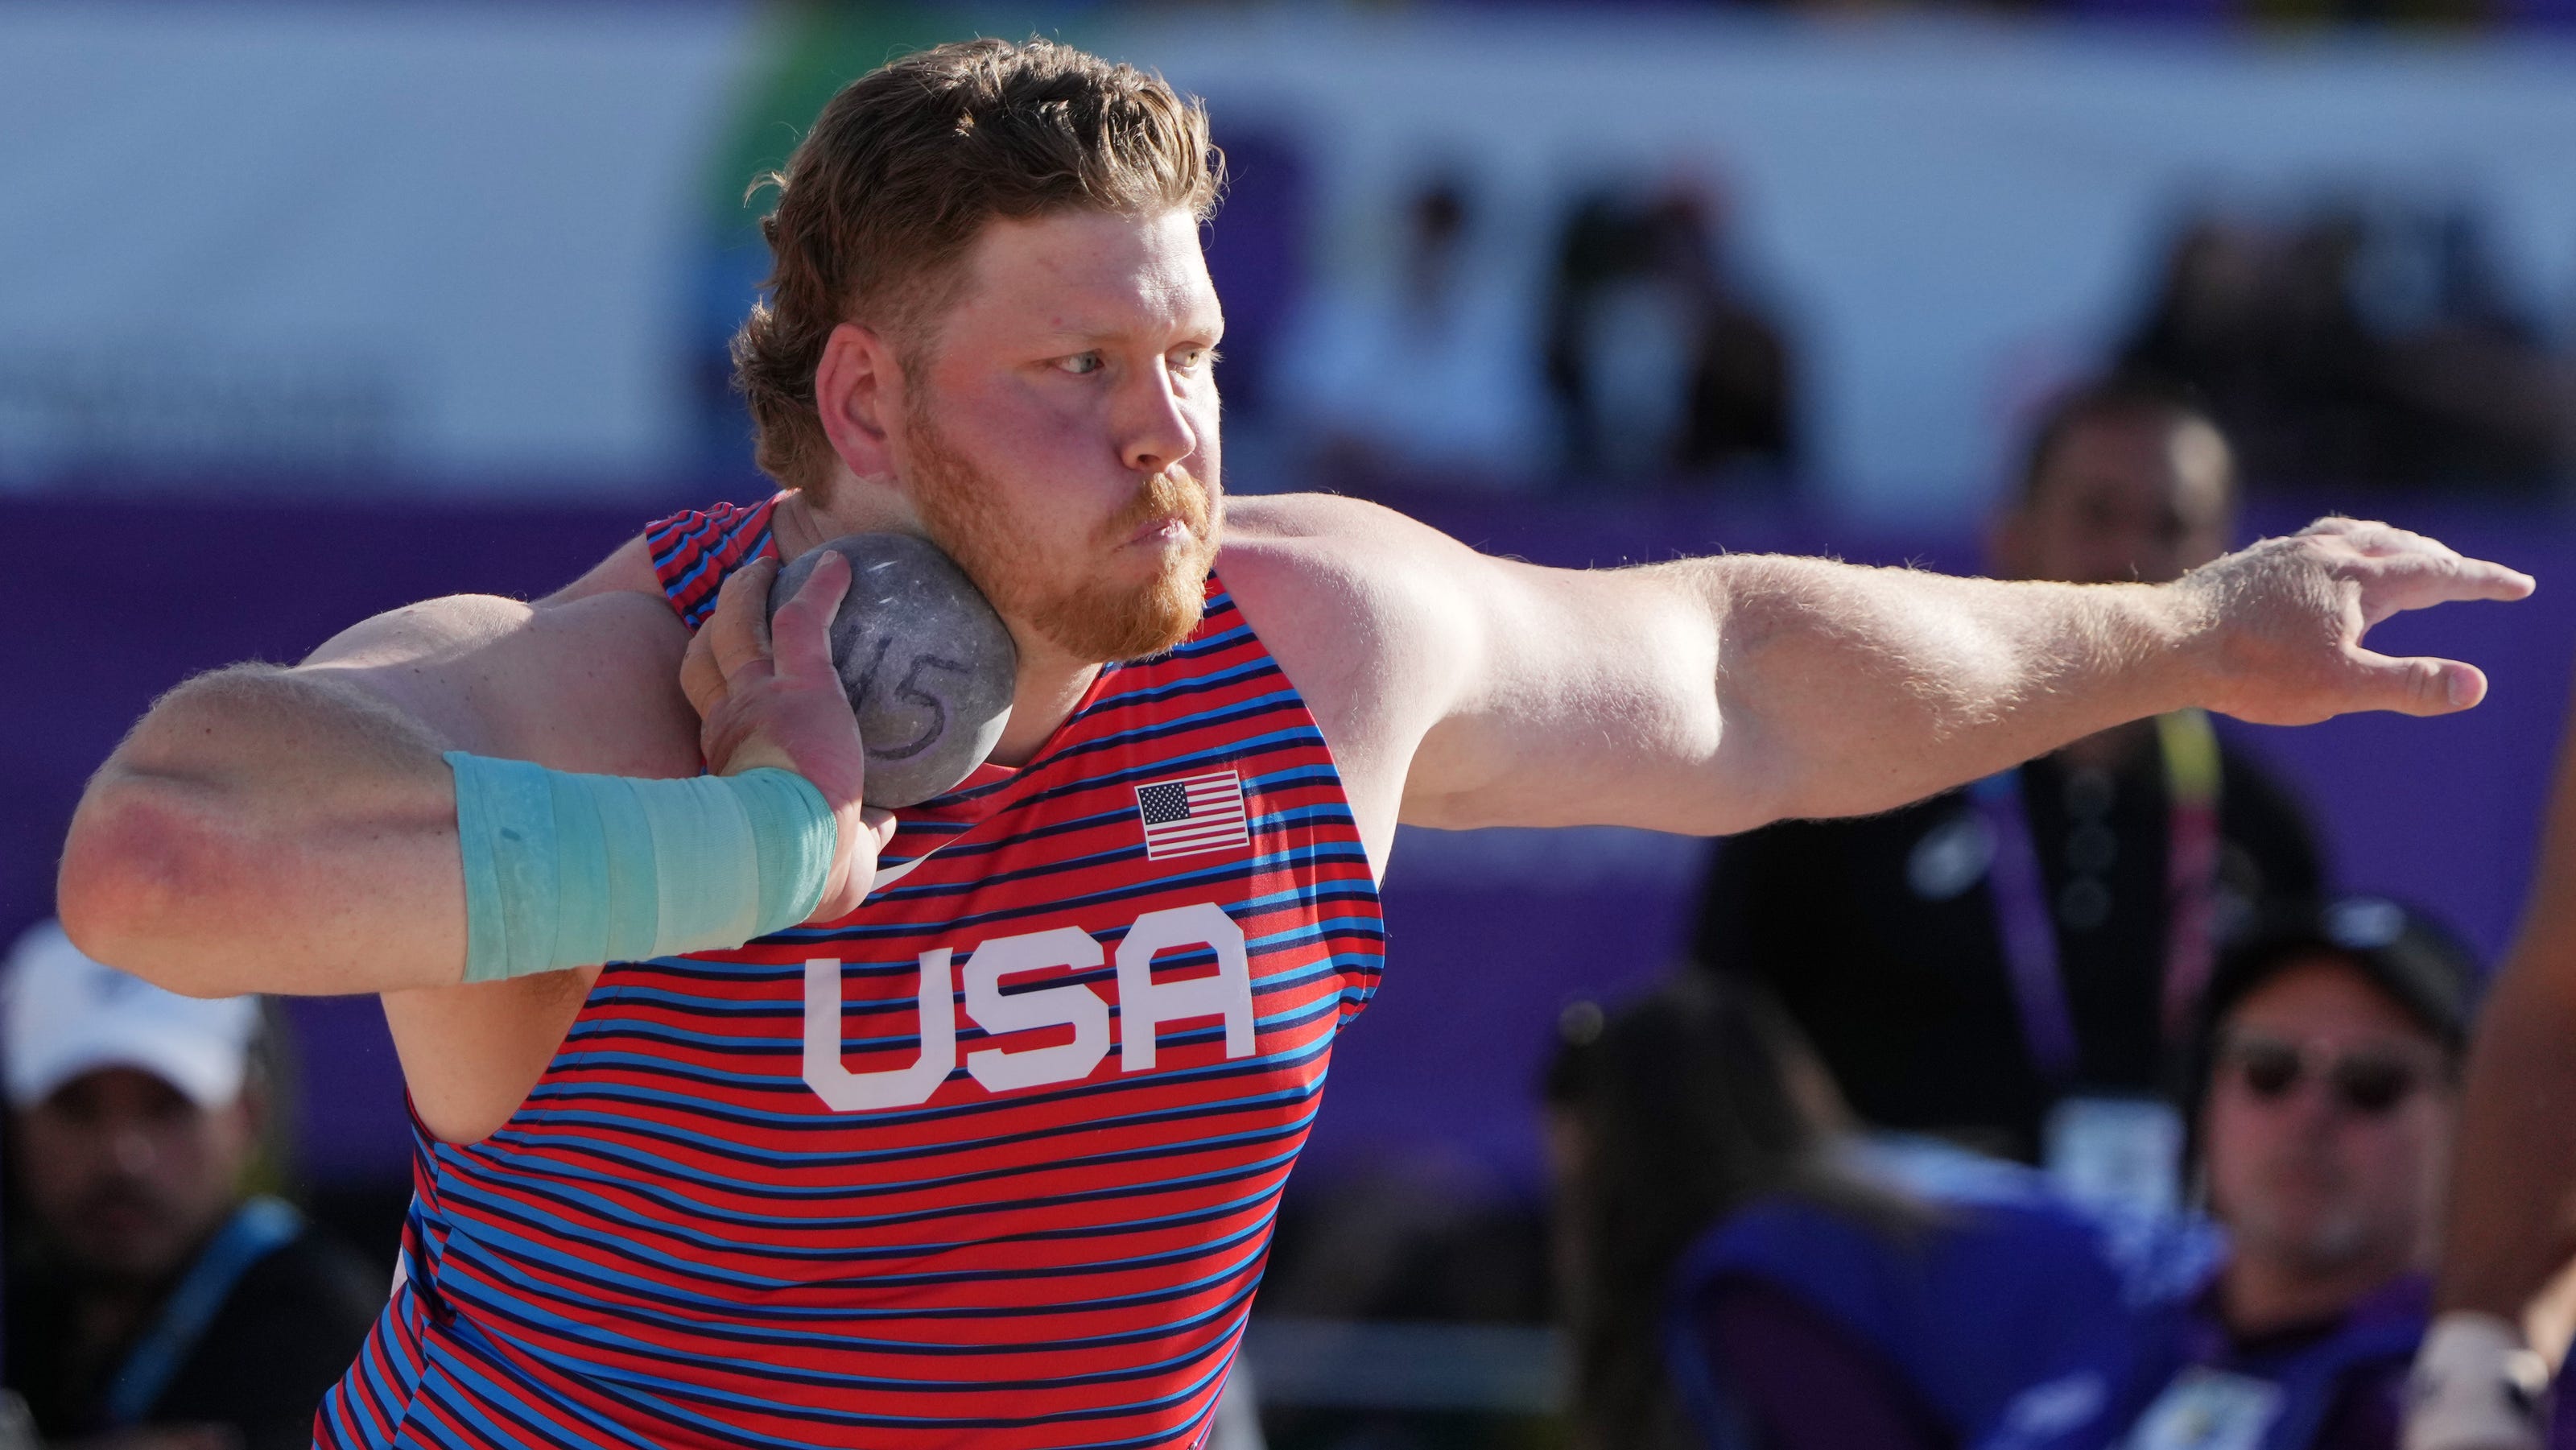 ryan-crouser-leads-u-s-to-historic-first-sweep-of-shot-put-podium-at-world-track-and-field-championships